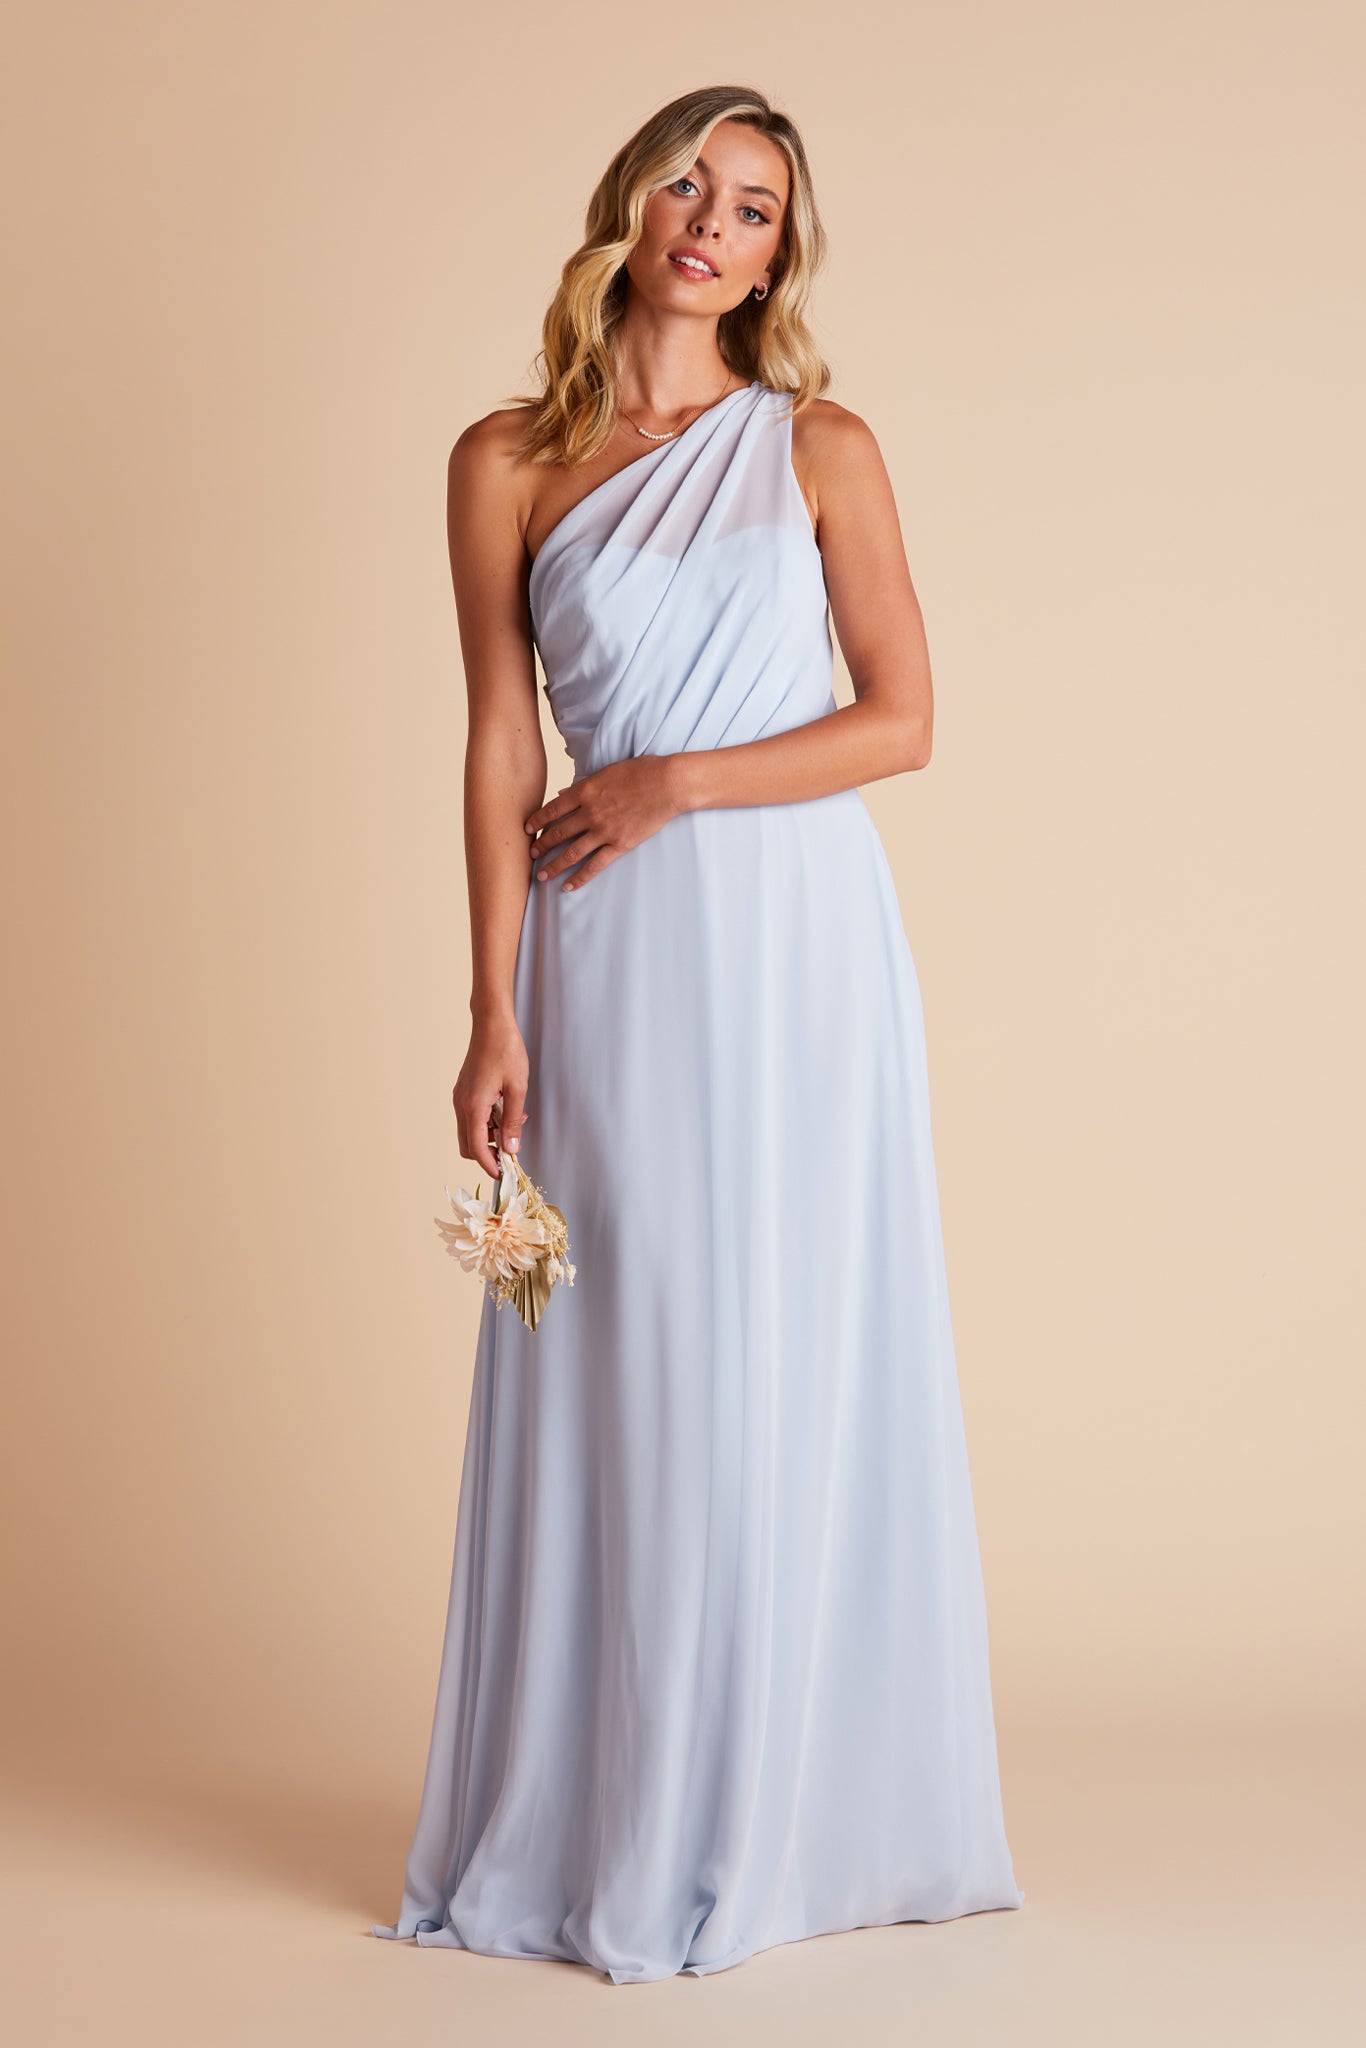 Kira bridesmaids dress in ice blue chiffon by Birdy Grey, front view